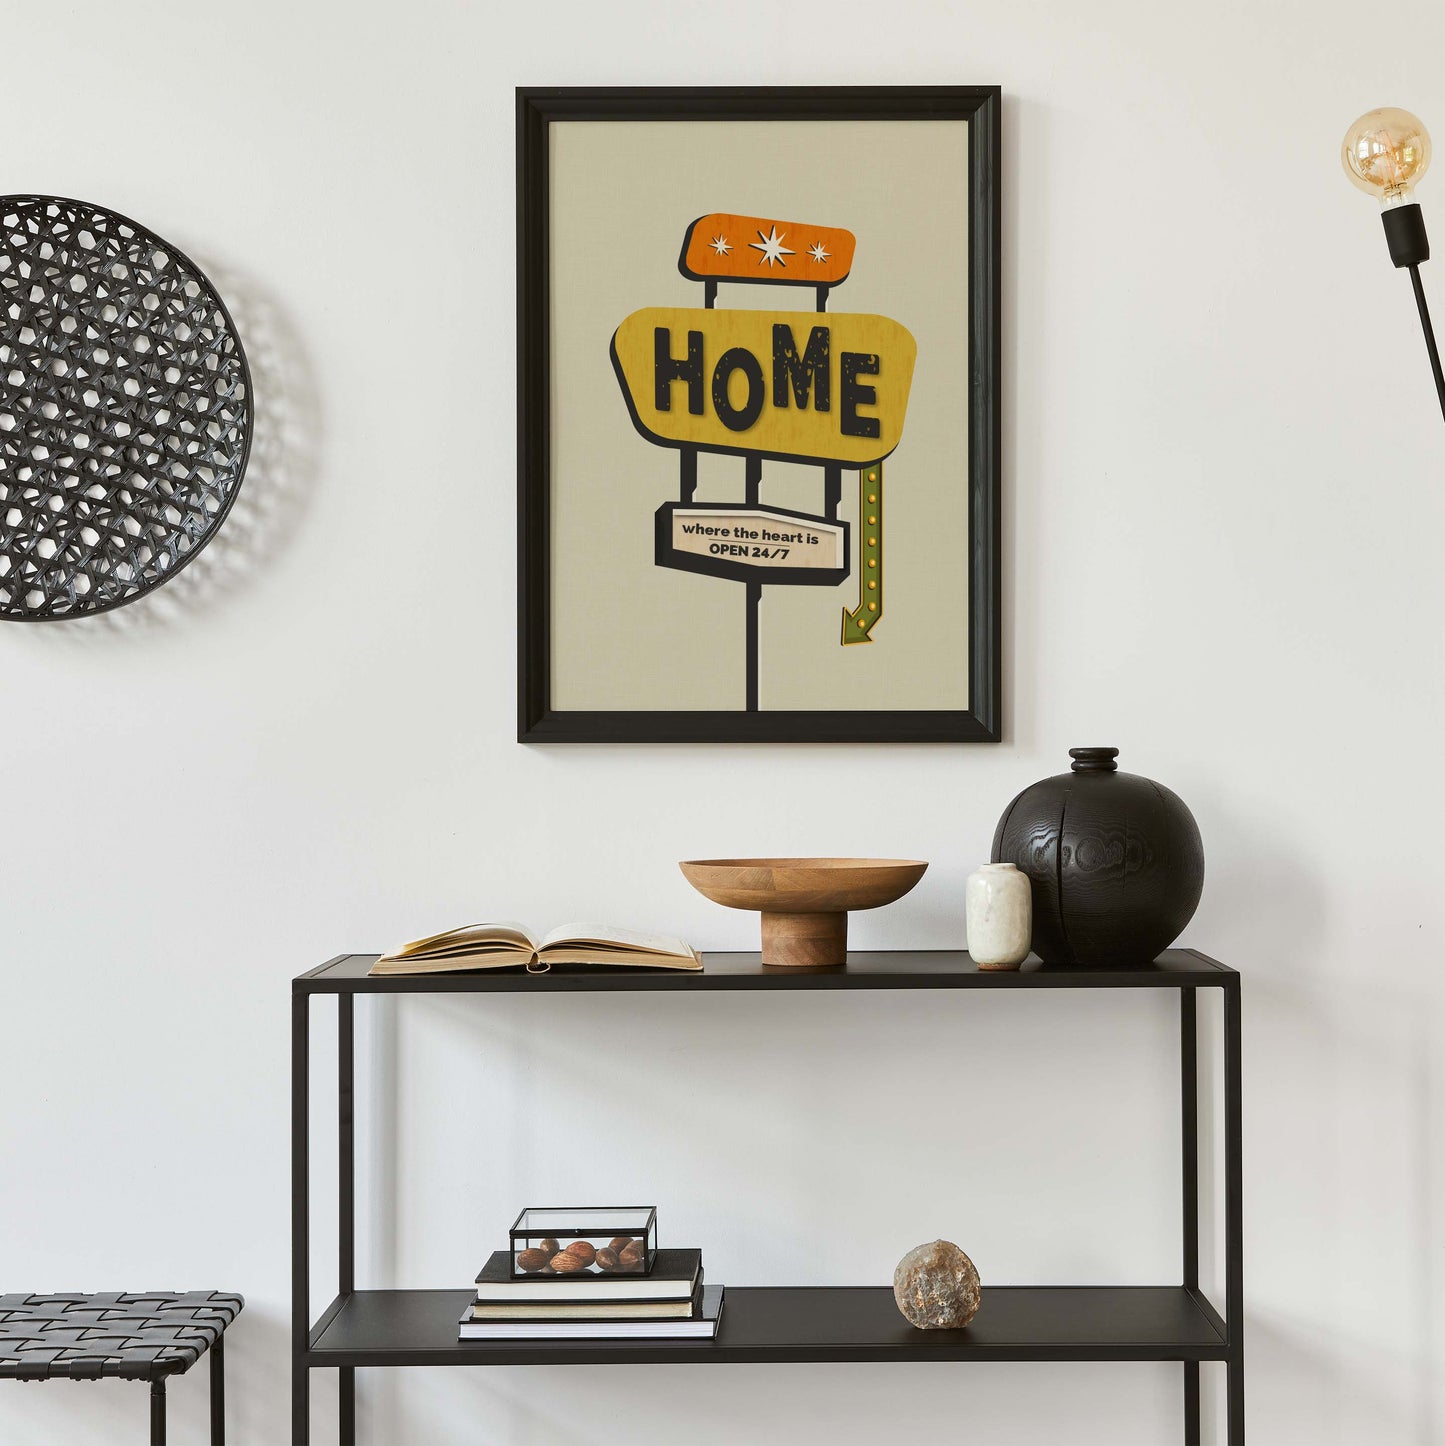 Home sign family print with a mid century modern style